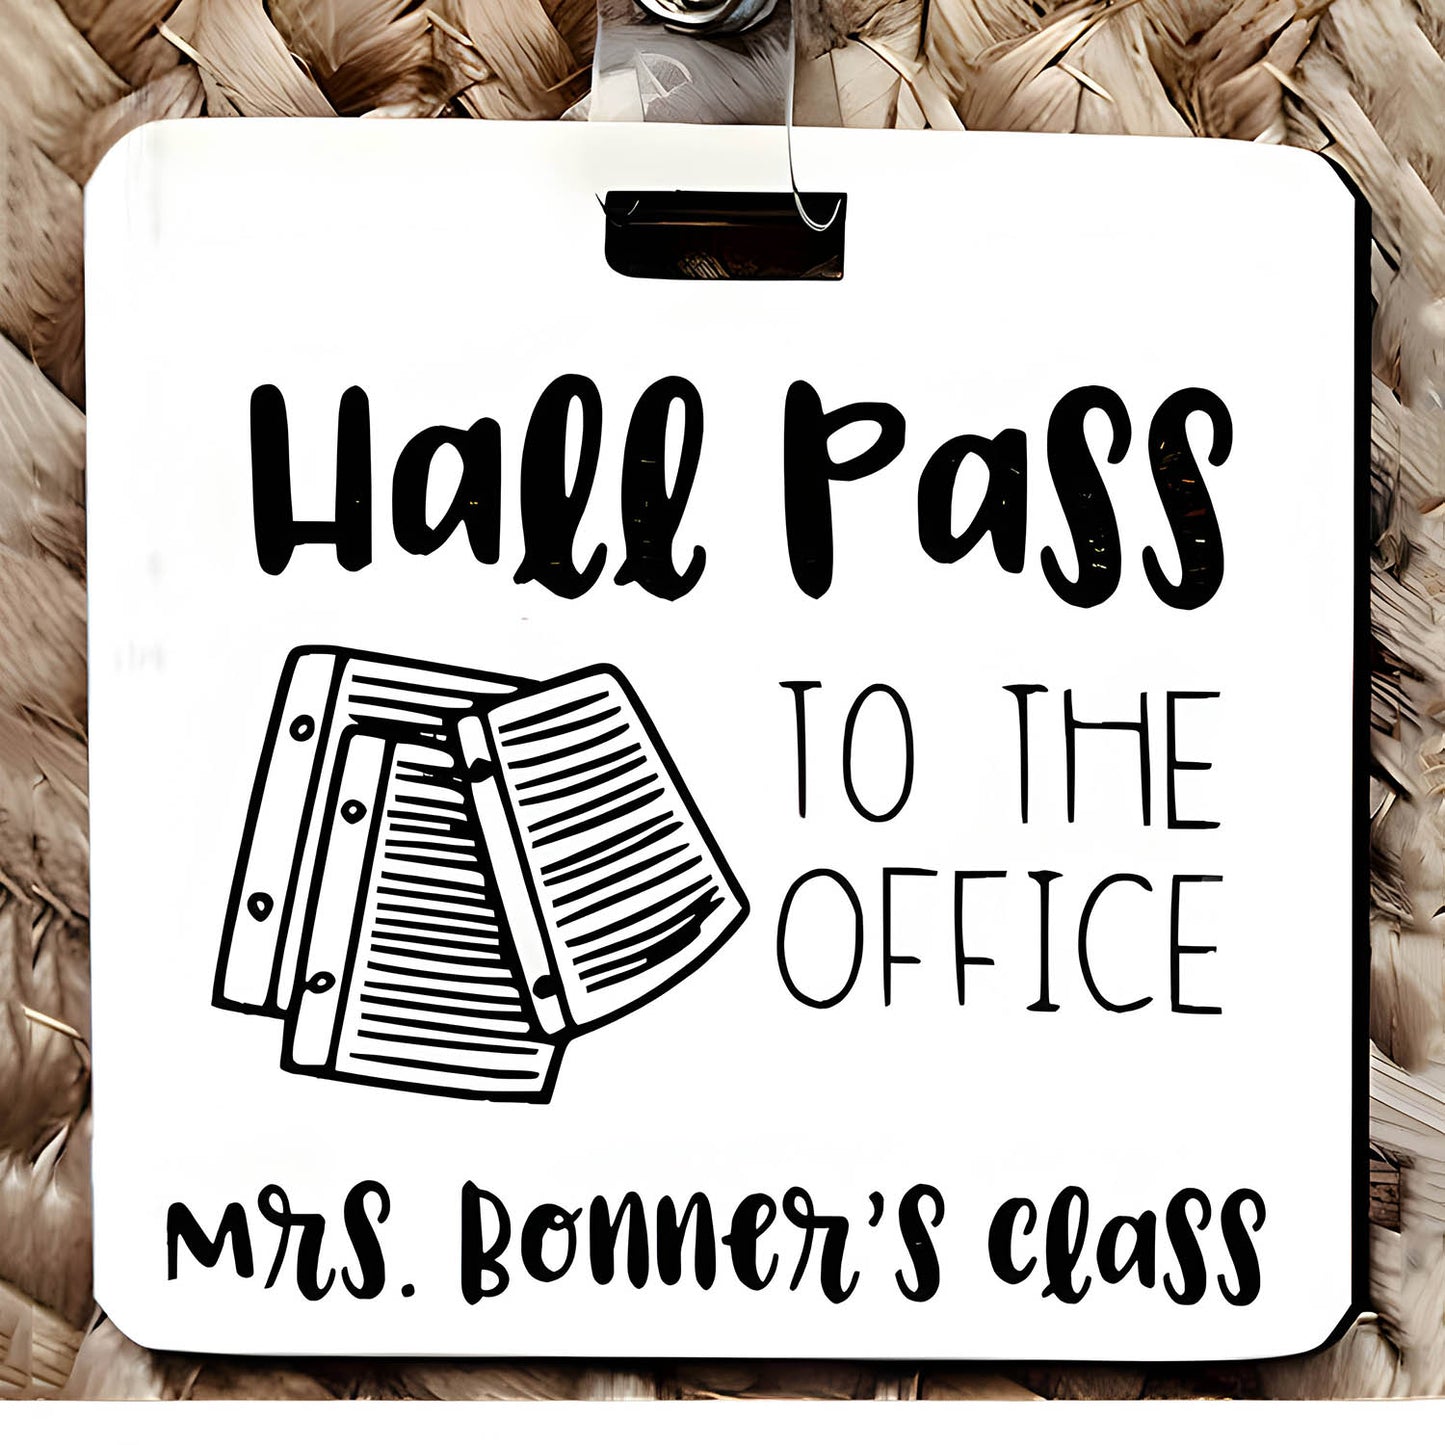 Personalized School Hall Pass - "Hall Pass to the Office"